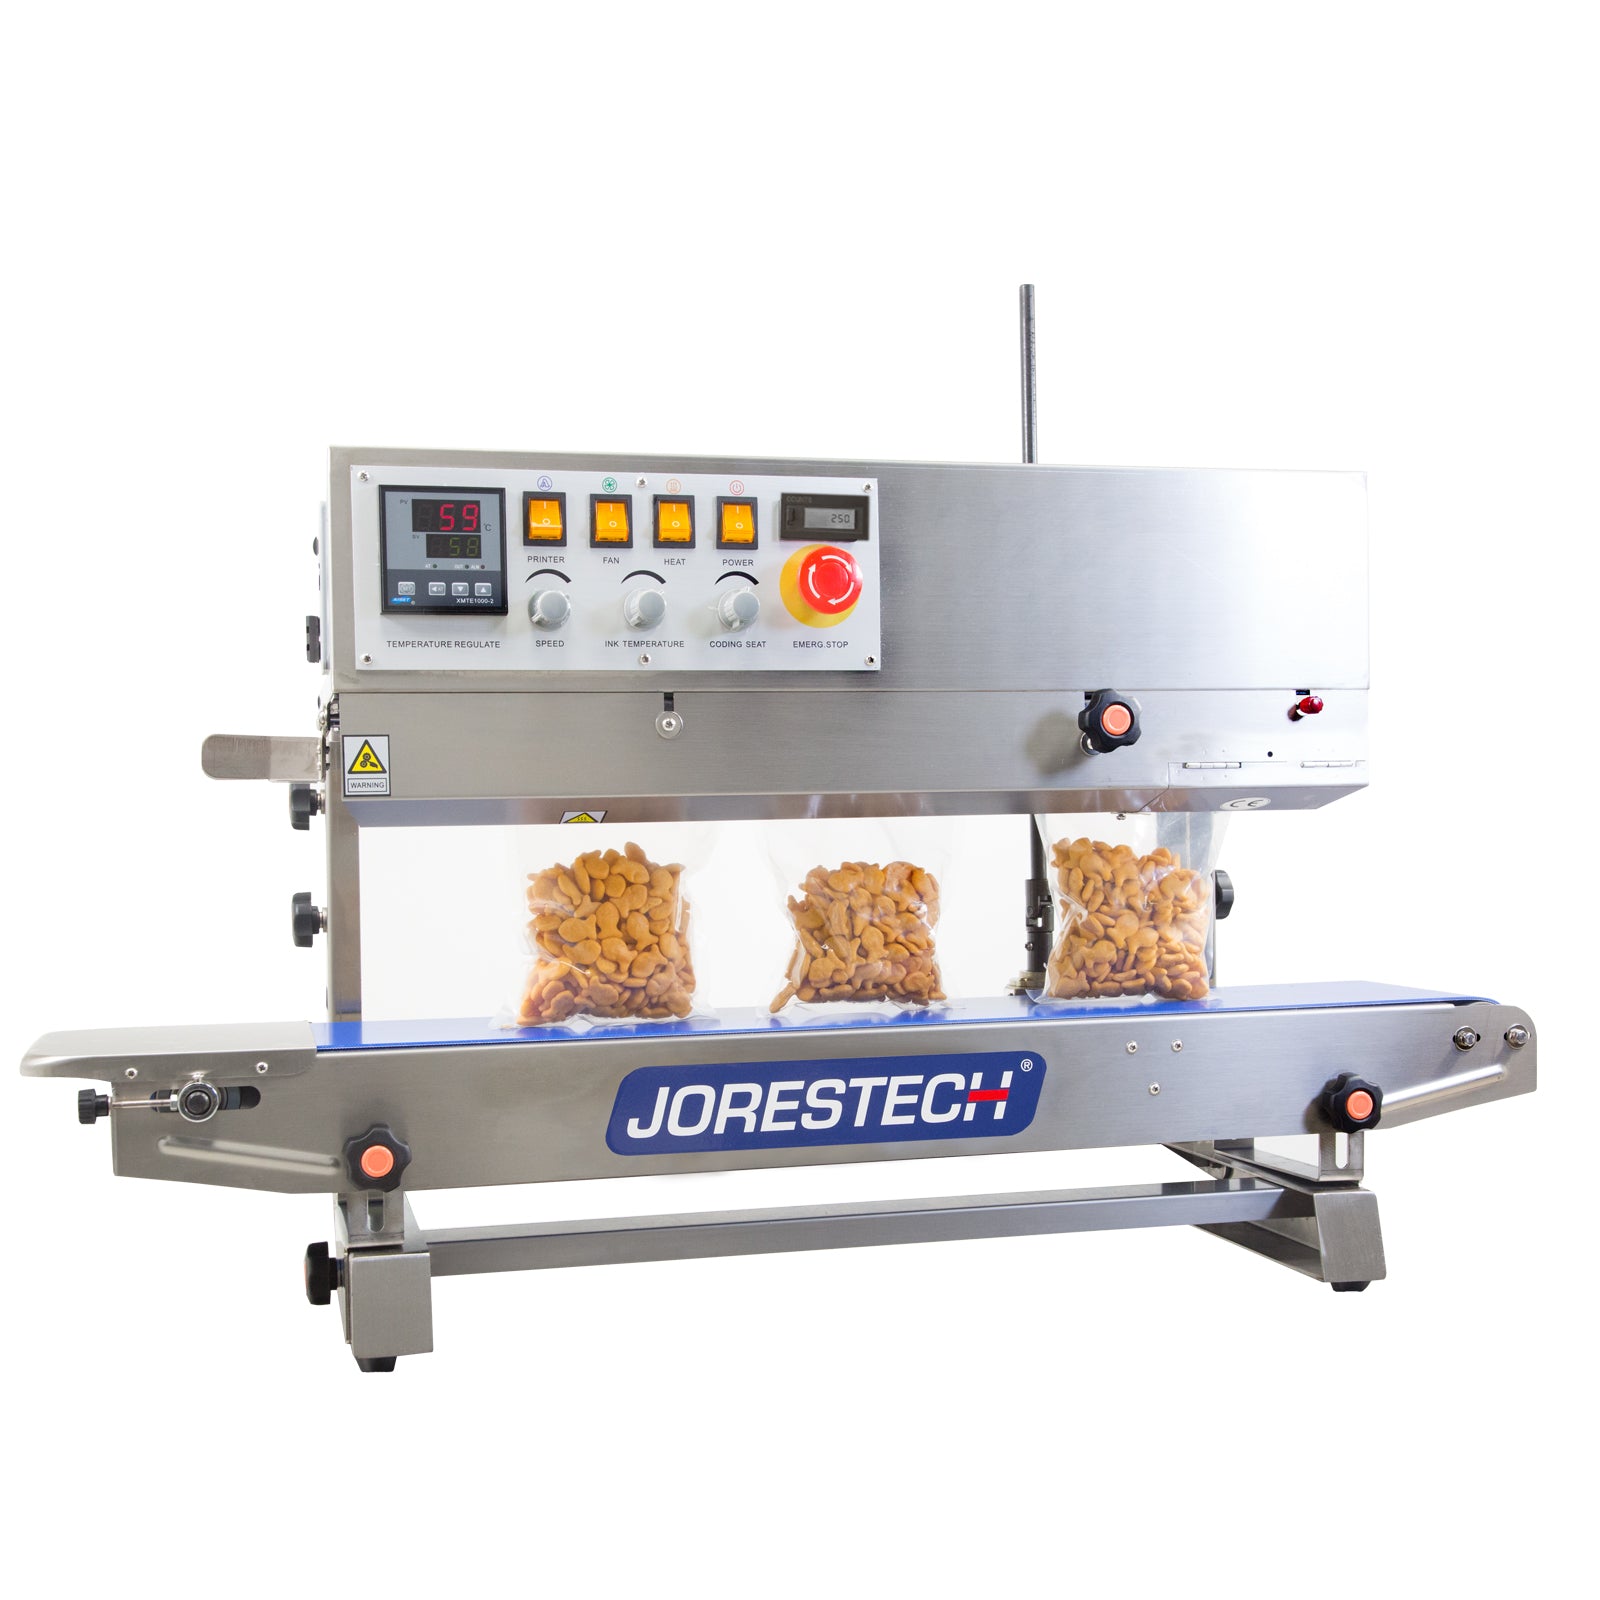 Left to right JORES TECHNOLOGIES® stainless steel  continuous band sealer with digital temperature control and coder sealing and coding several clear plastic bags filled with orange crackers in a vertical position